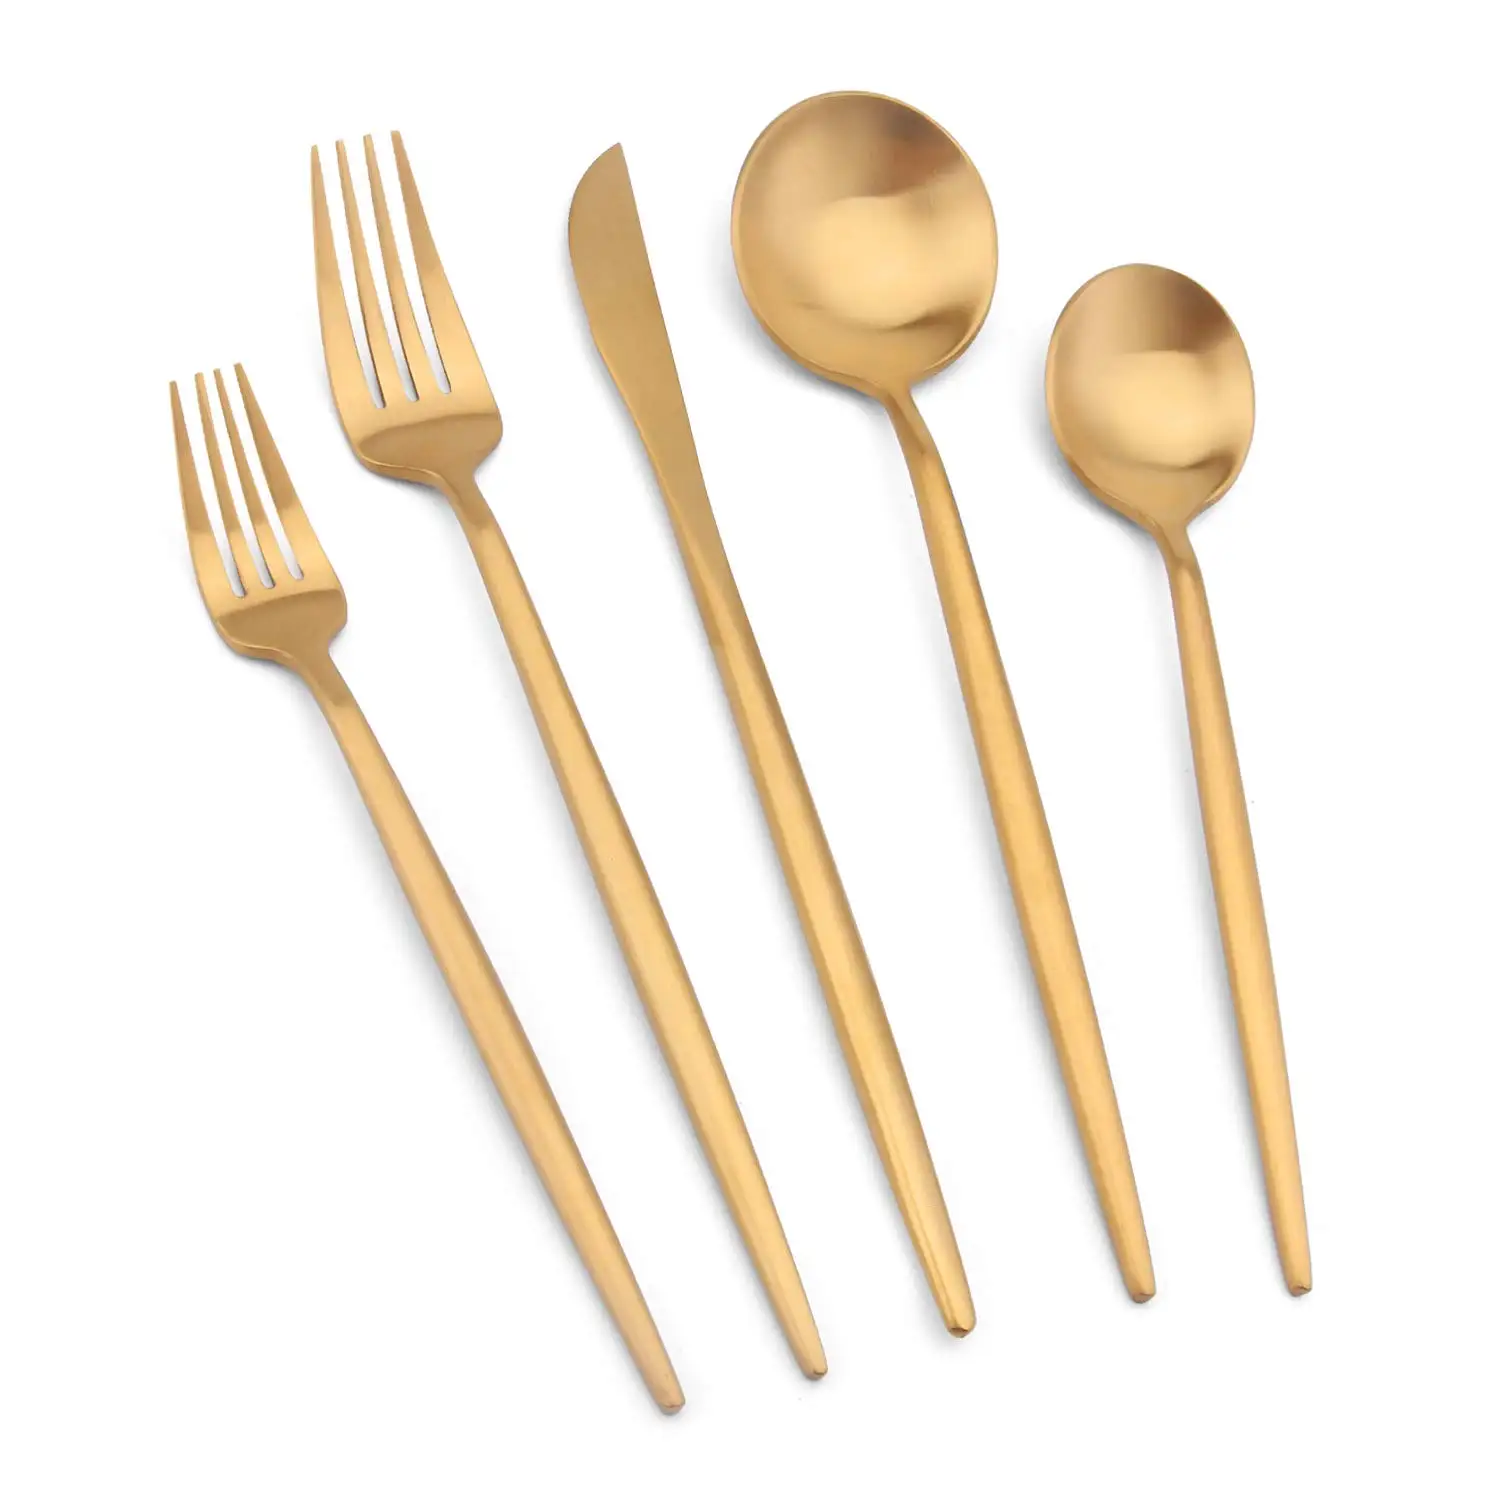 

High Polishing Luxury Gold Silverware 5pcs Flatware Set Cutlery Set 18/10 Stainless Steel, Gold/silver/rose gold/gold with colorful handle